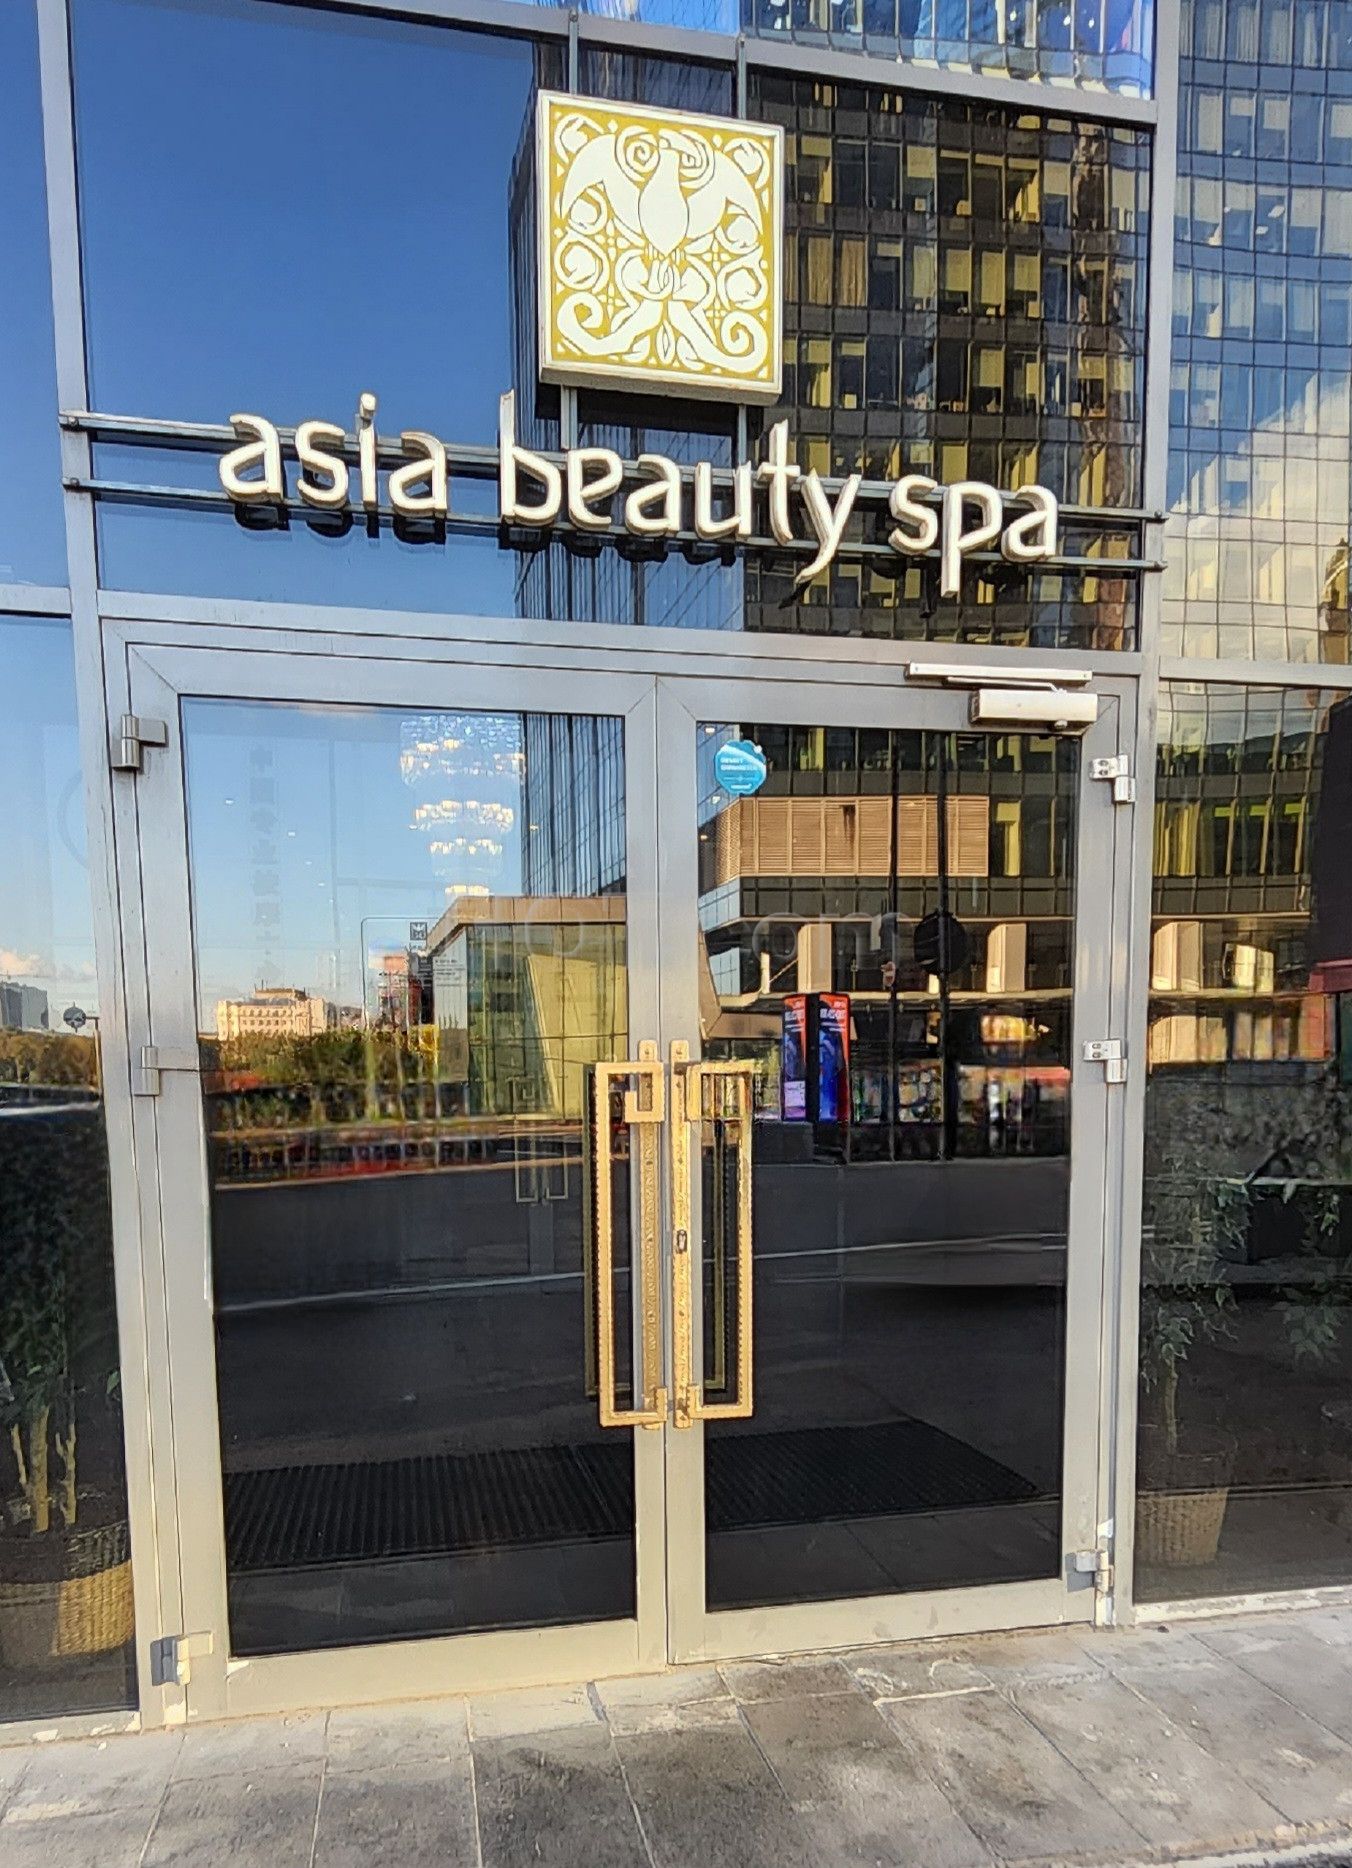 Moscow, Russia Asia Beauty SPA